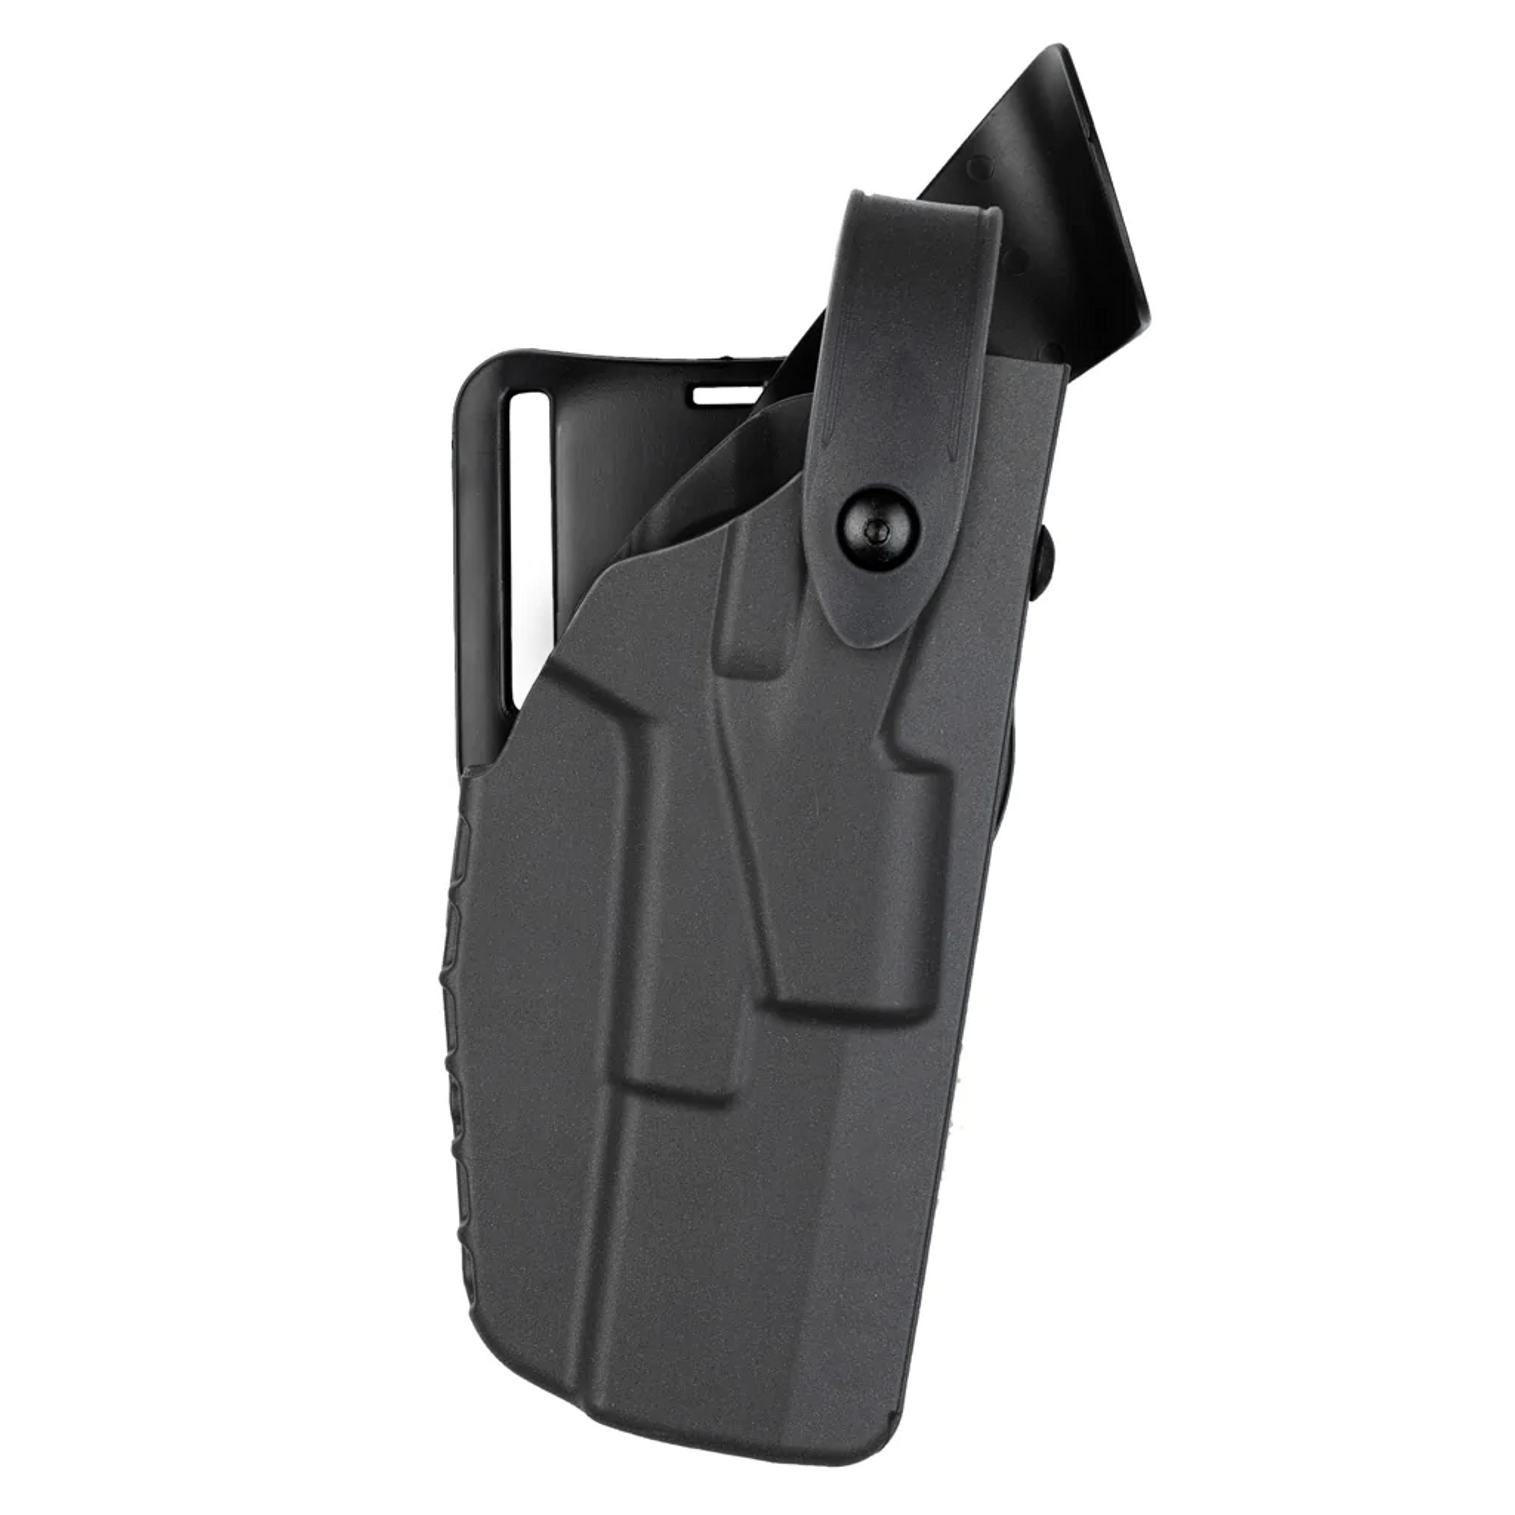 Model 7360 7ts Als/sls Mid-ride Duty Holster For Smith & Wesson M&p 9